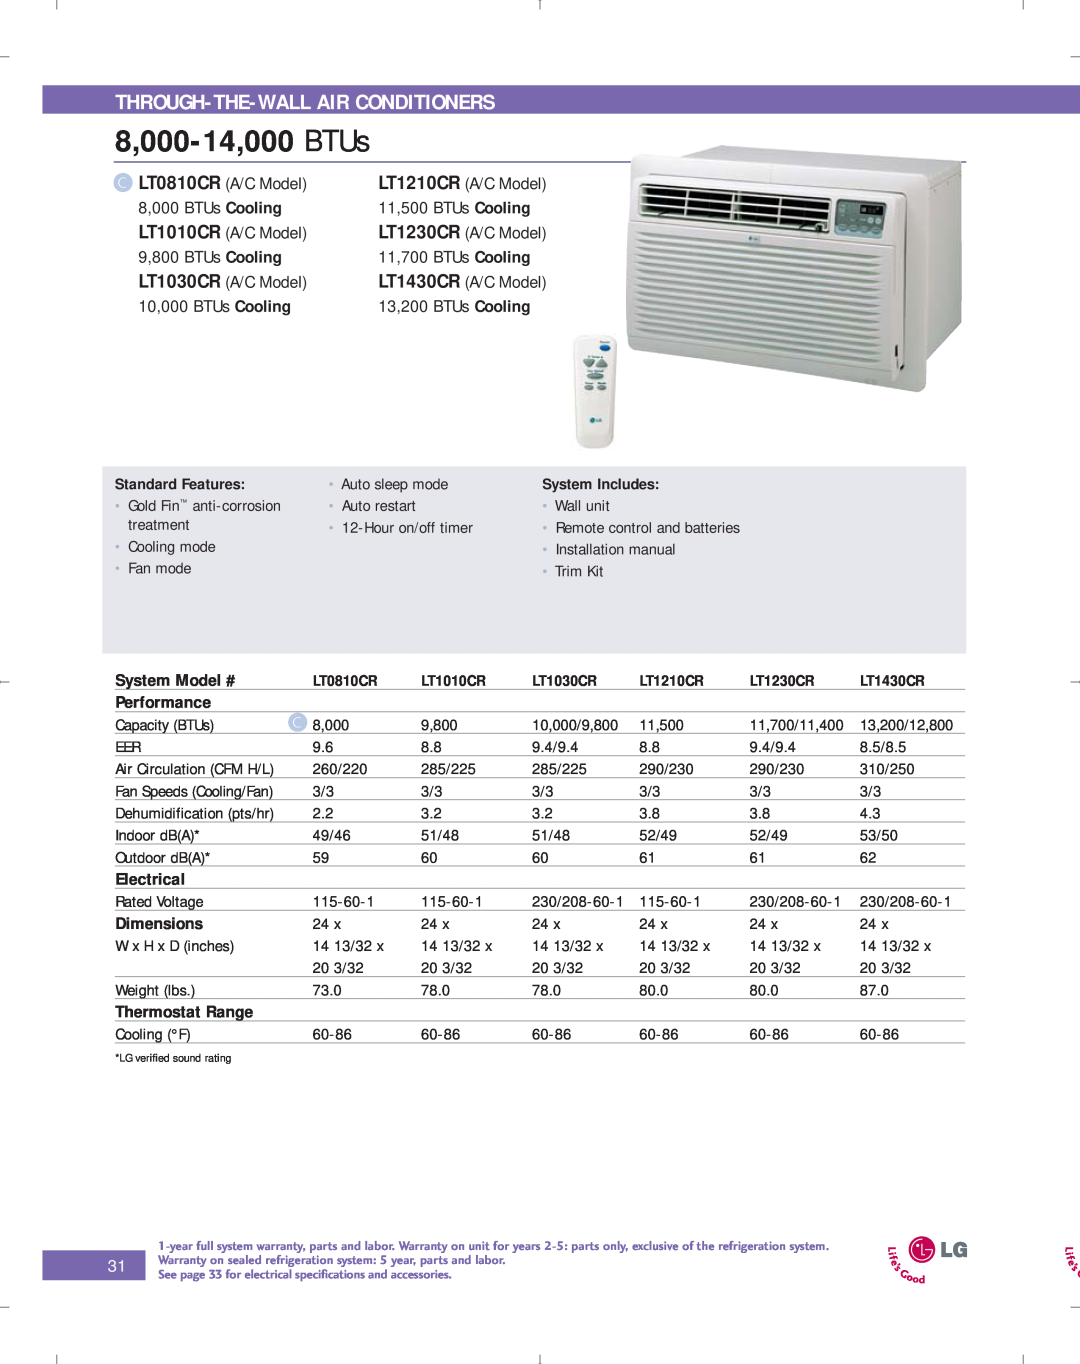 LG Electronics PG-100-2006-VER3 manual 8,000-14,000 BTUs, Through-The-Wall Air Conditioners, Dimensions, System Model # 